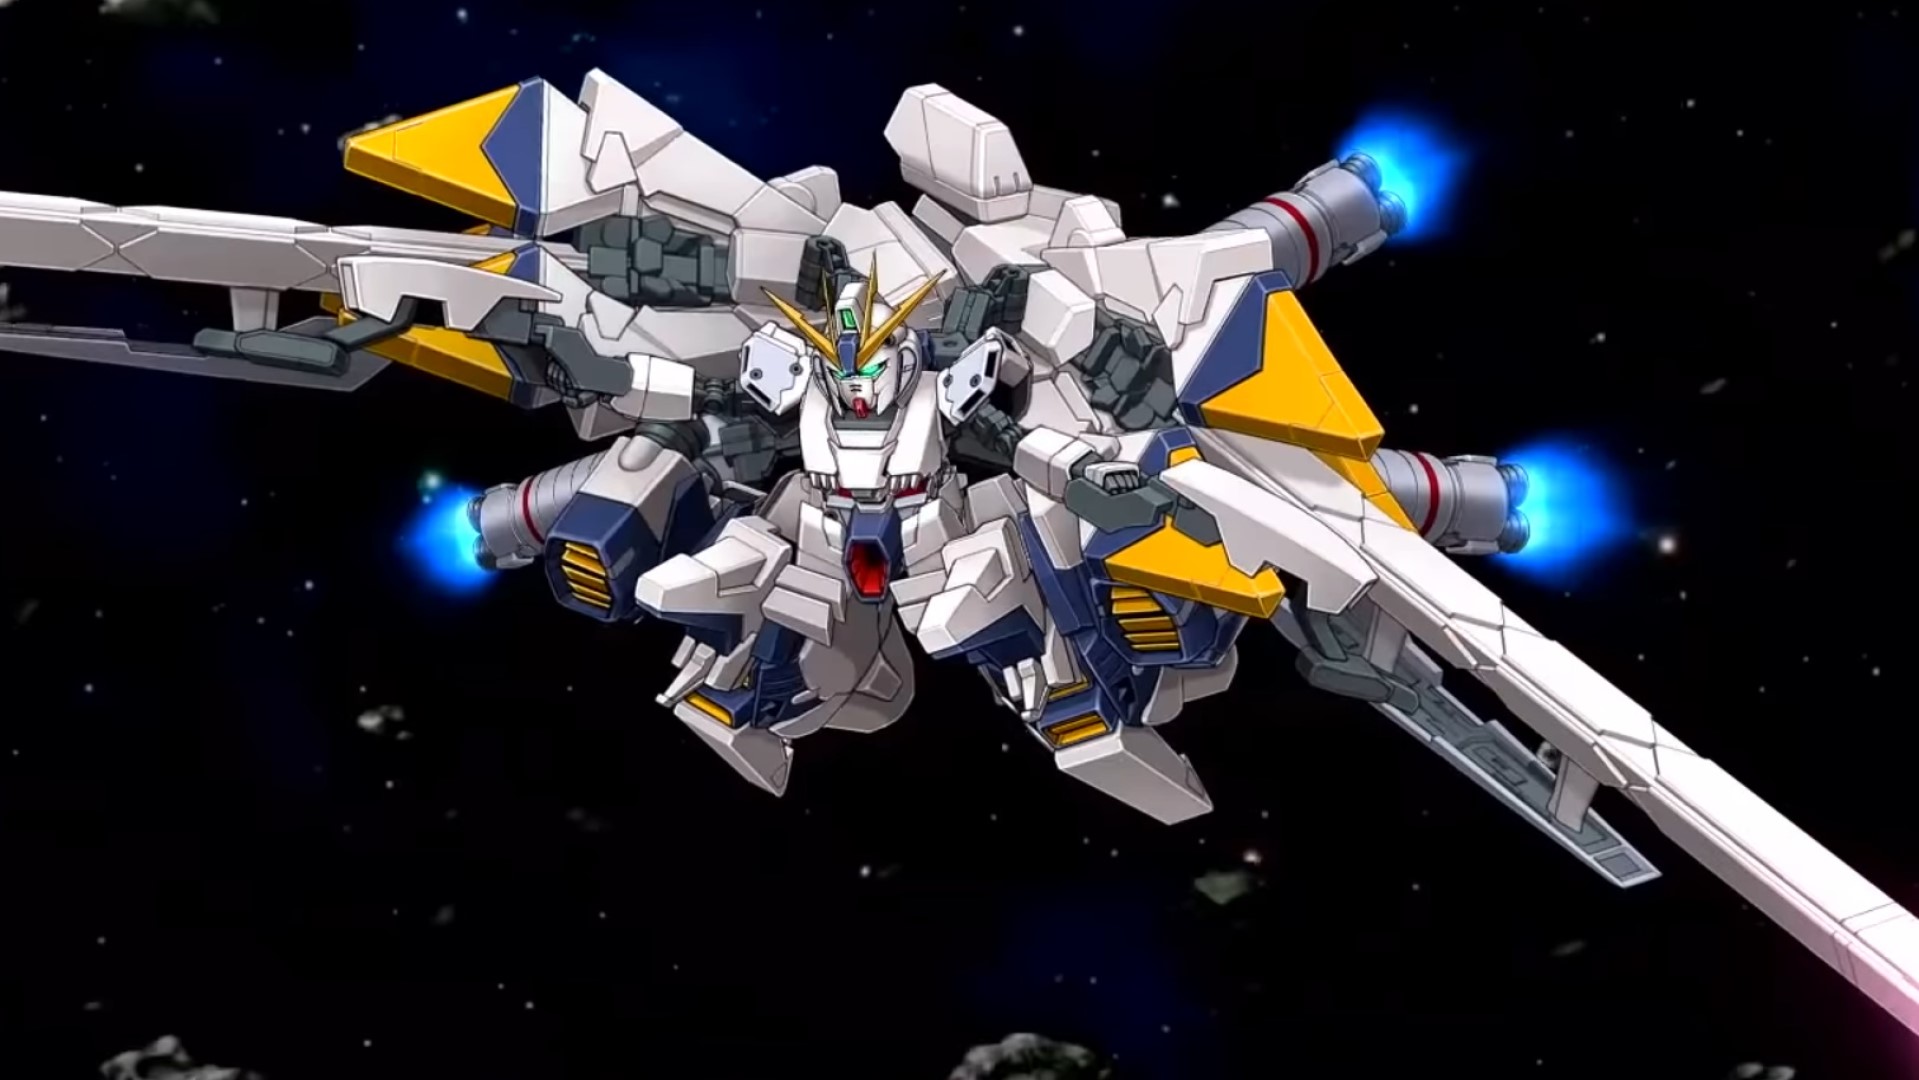 Long-running anime strategy game Super Robot Wars finally gets a Steam release